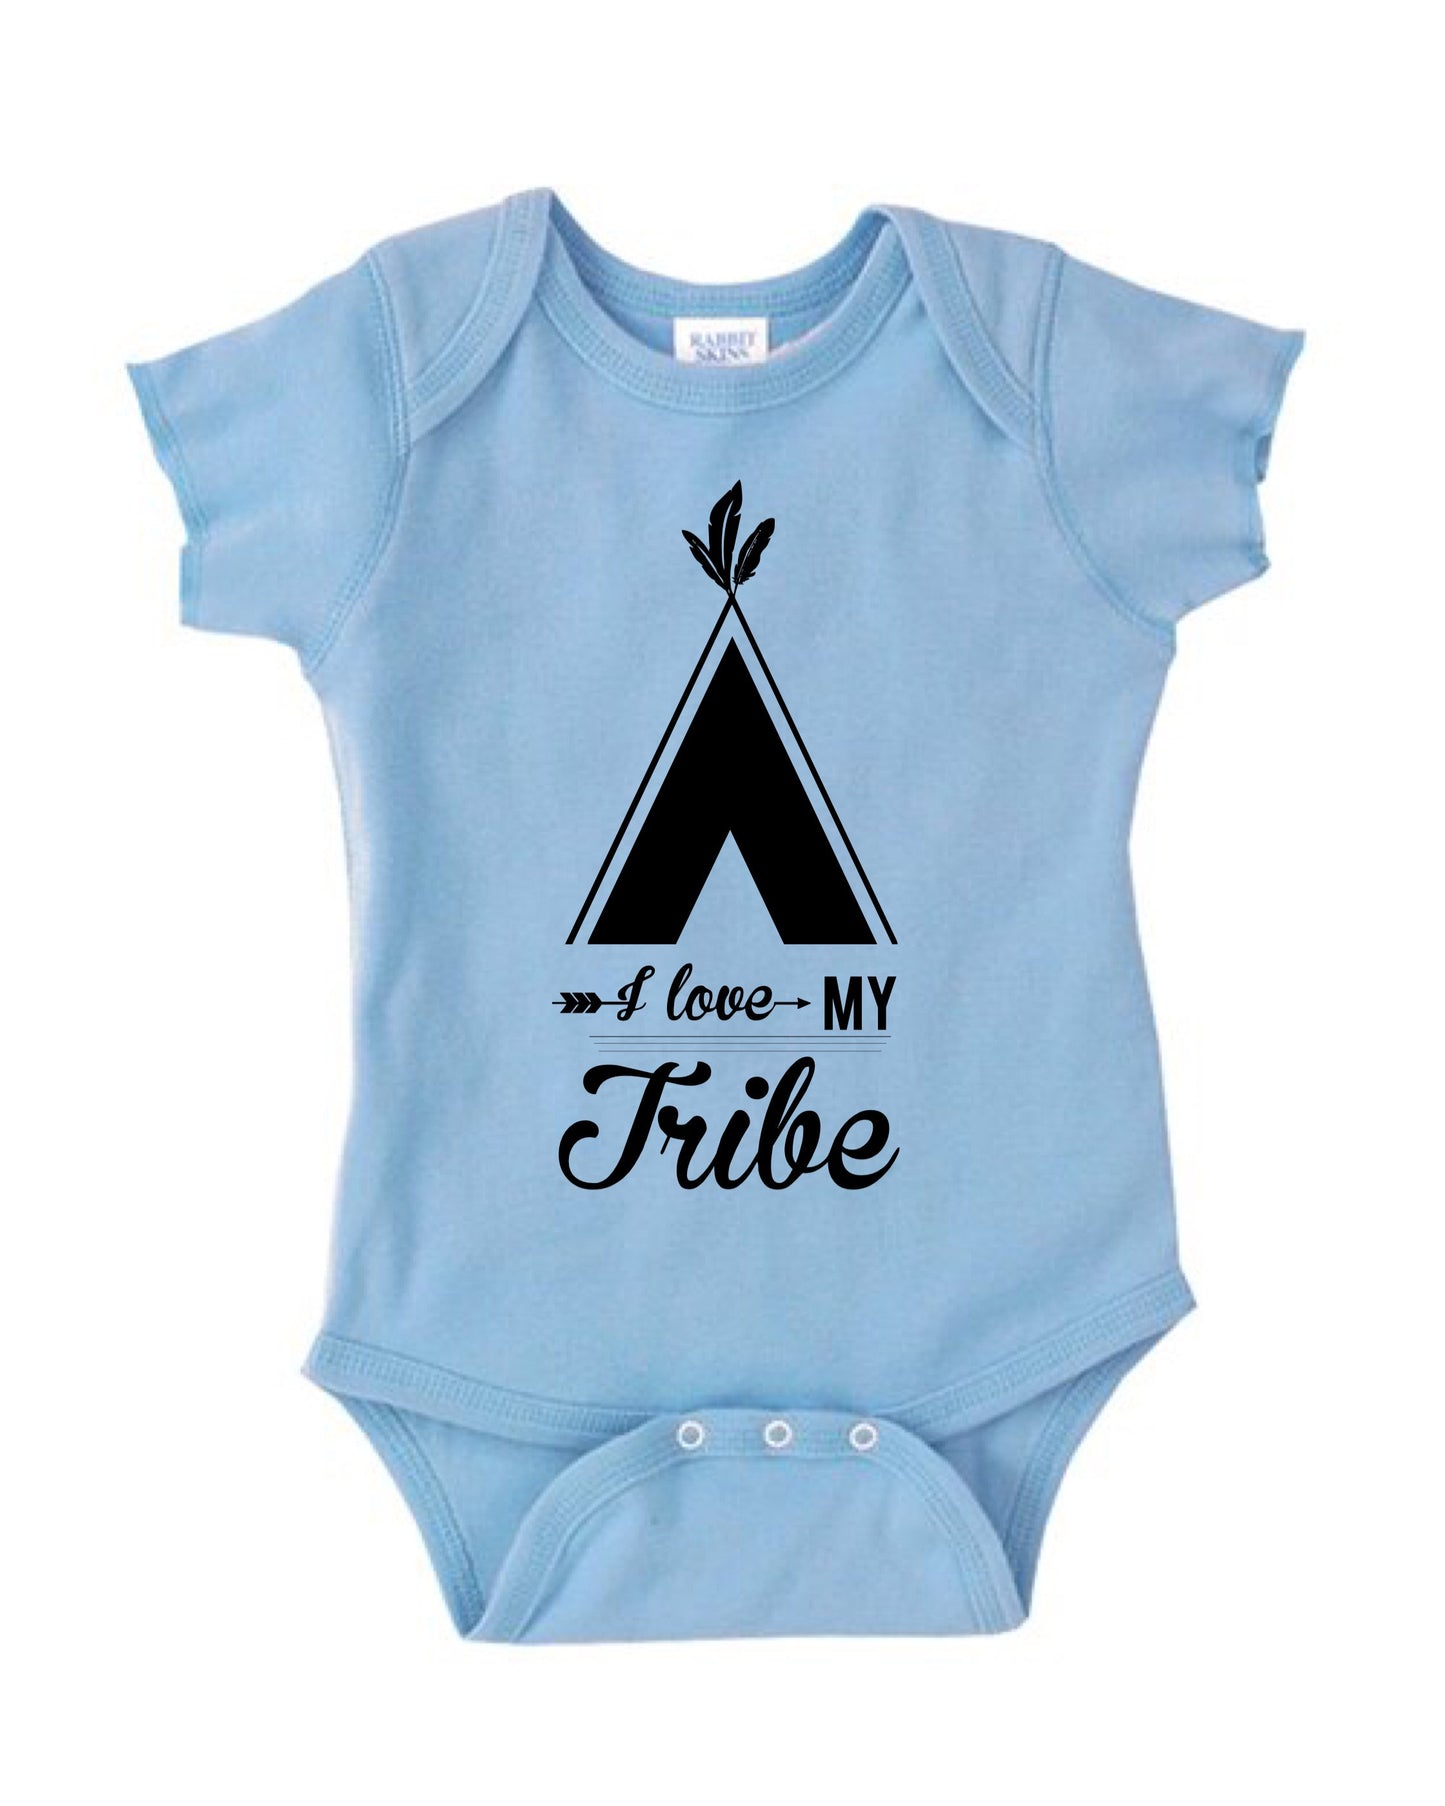 Love my tribe baby onesie| Baby name onesie| Baby shower gift| Gift for new baby| gift for new mom| personalized baby onesie| tutu romper